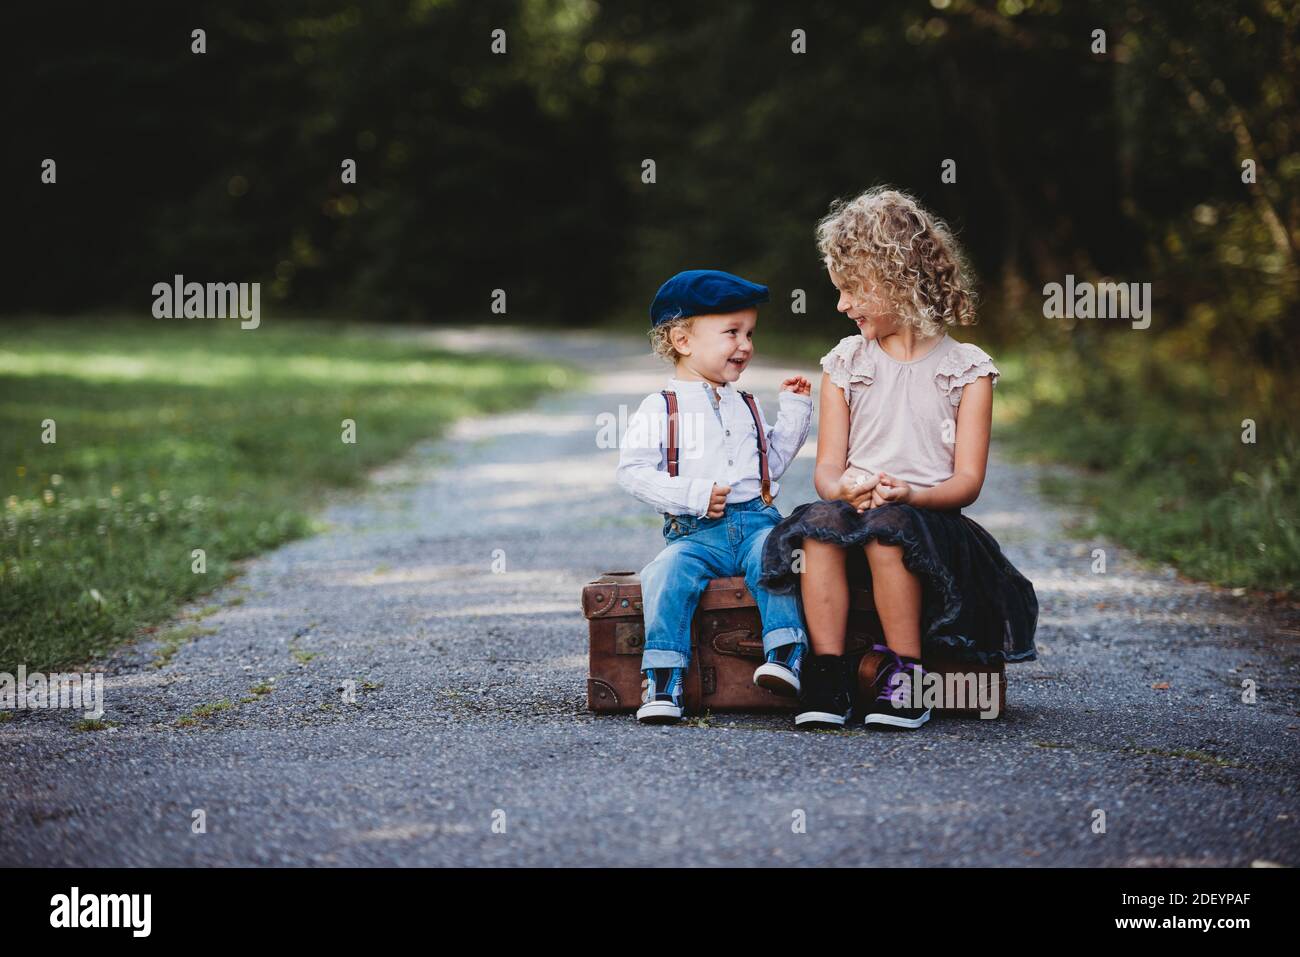 Brother and sister sitting on a vintage suitcase smiling at each other Stock Photo